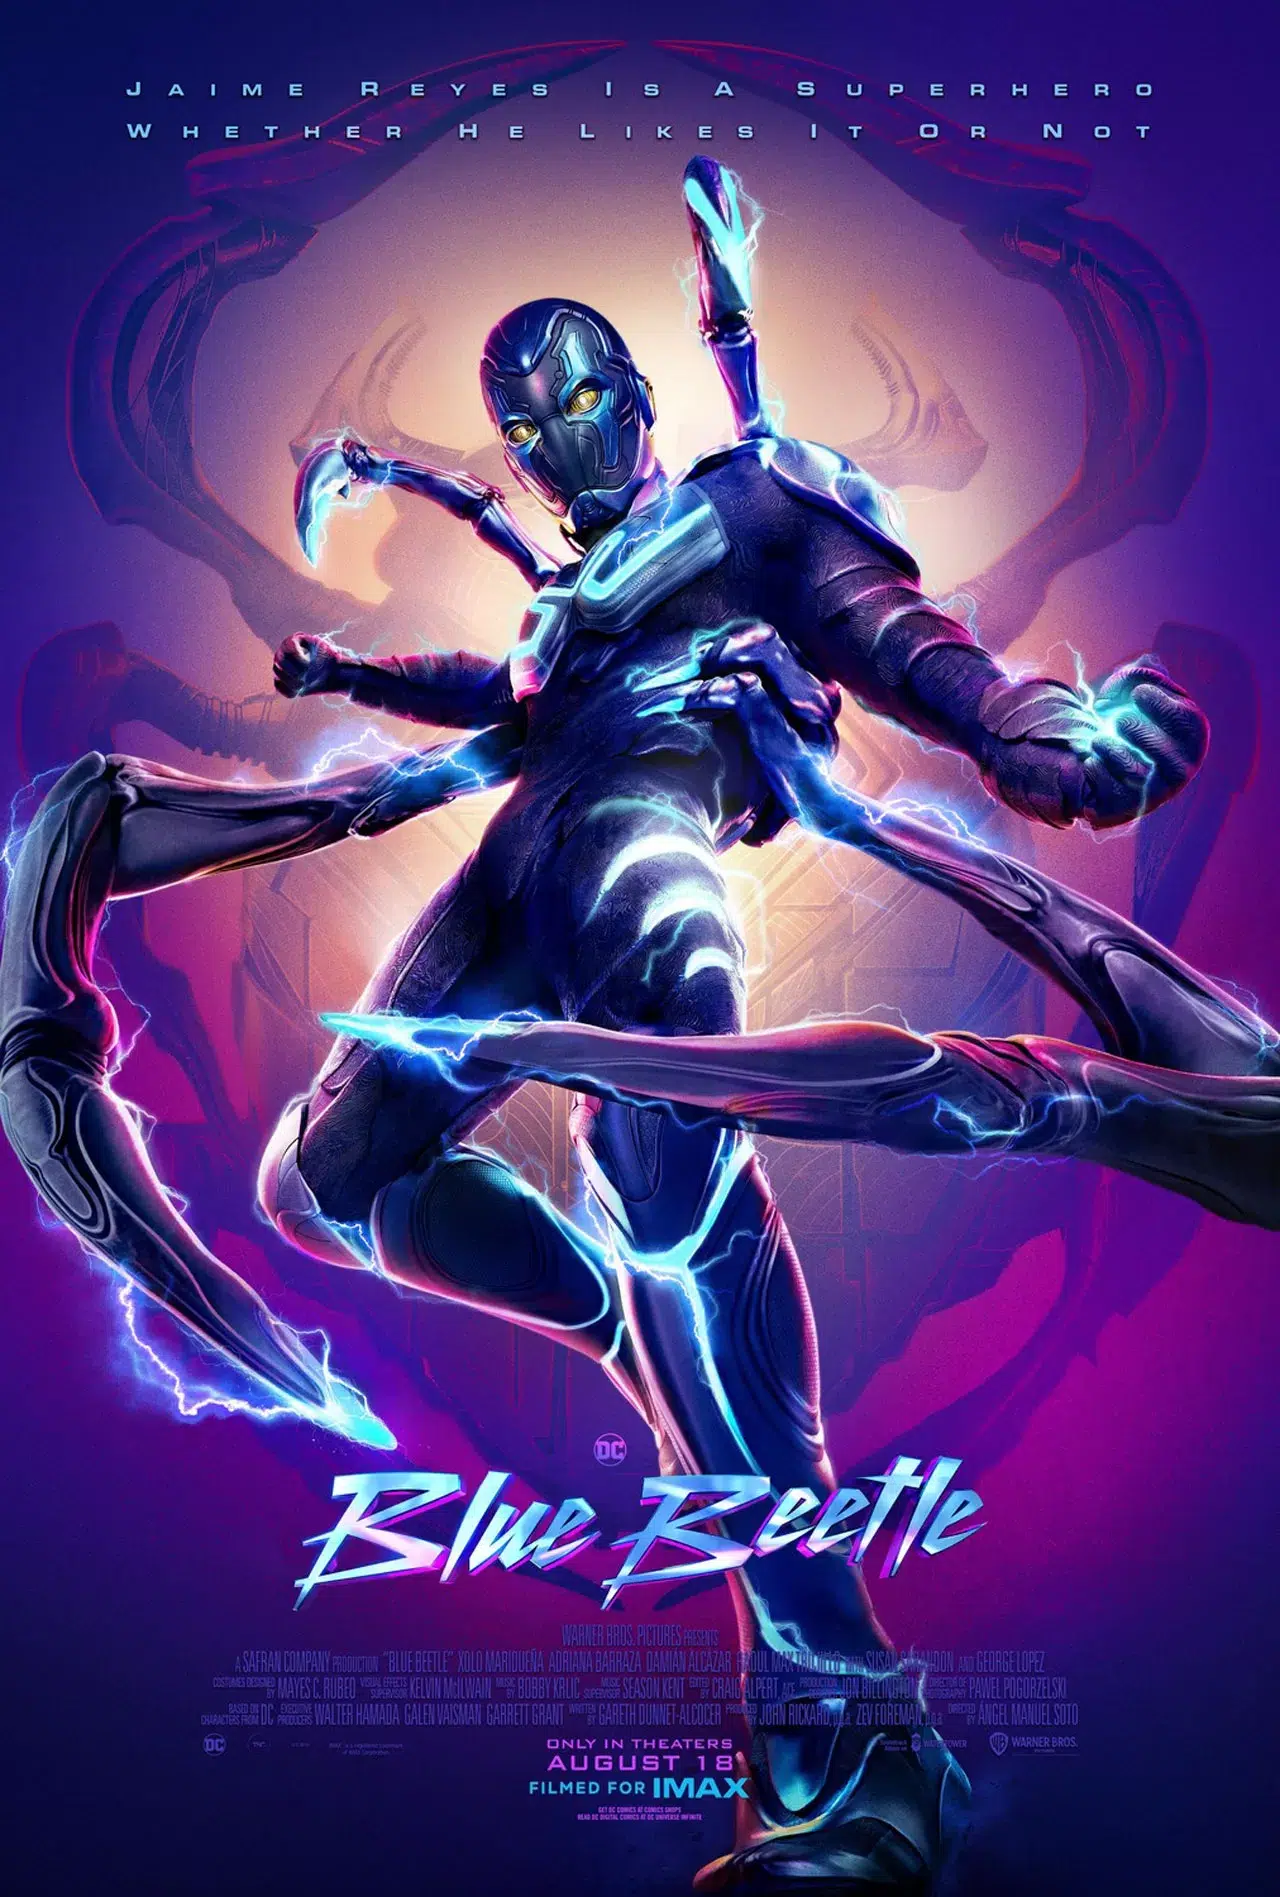 Blue Beetle': Succeeds with a Mix of '80s-Style VFX and Low Stakes